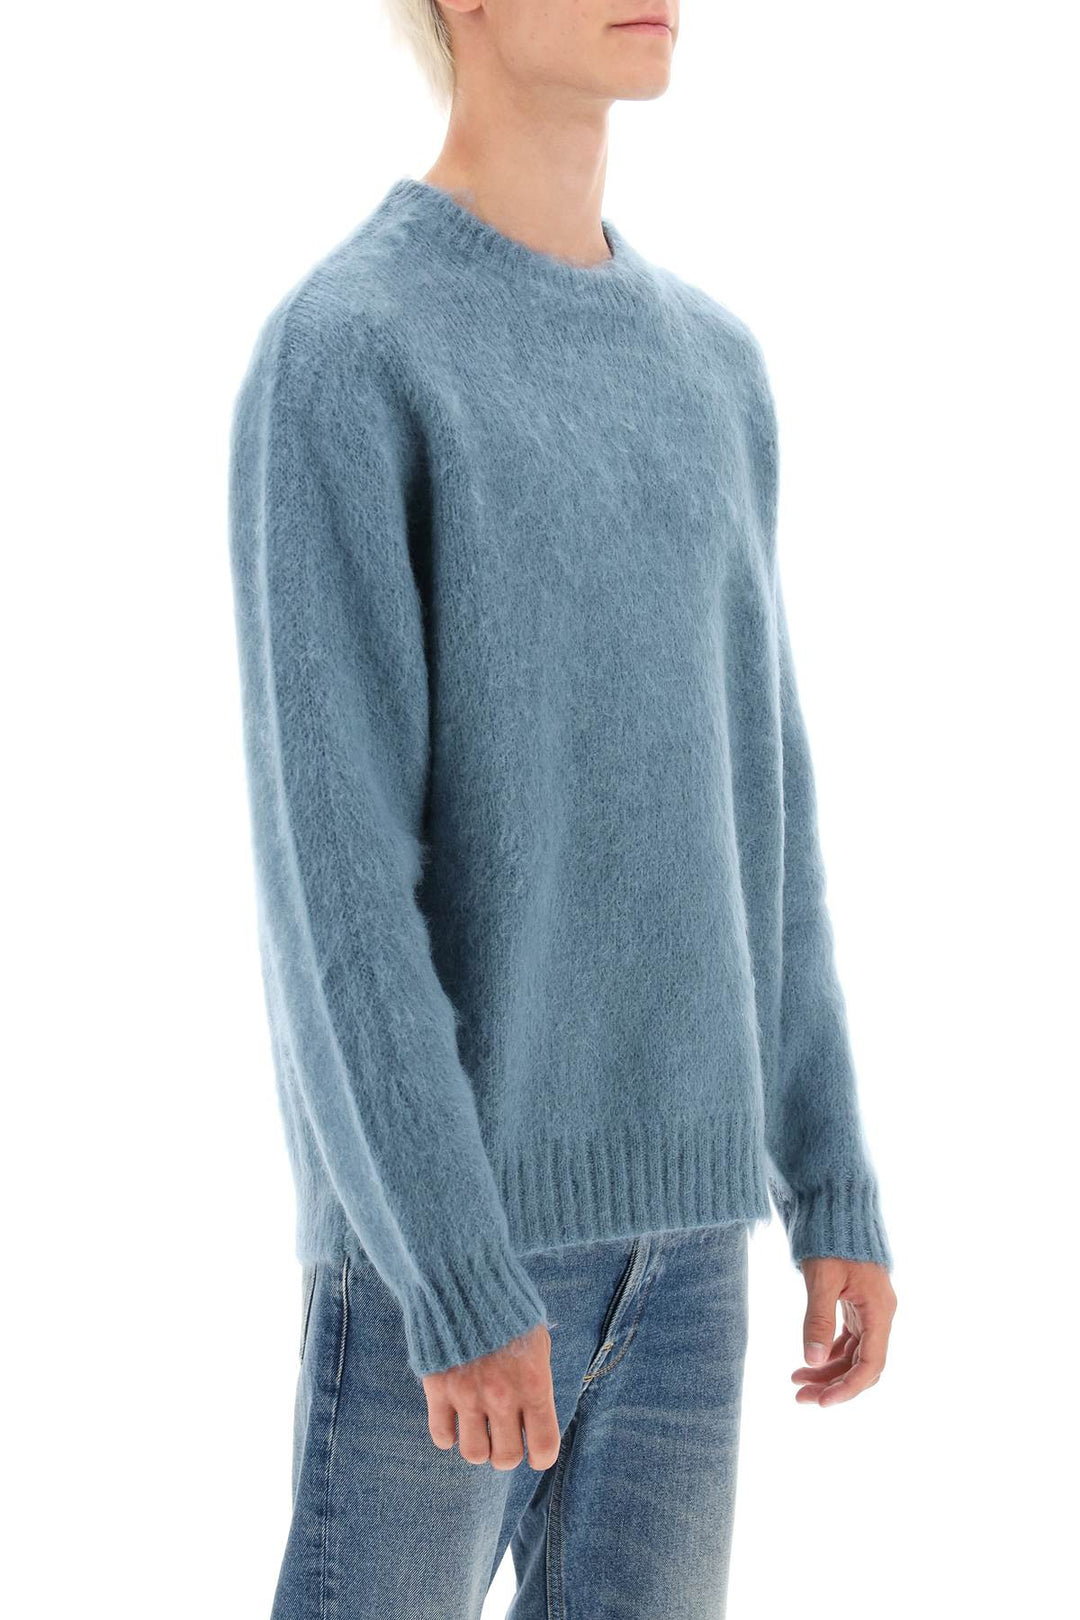 Golden Goose 'Devis' Brushed Mohair And Wool Sweater   Celeste